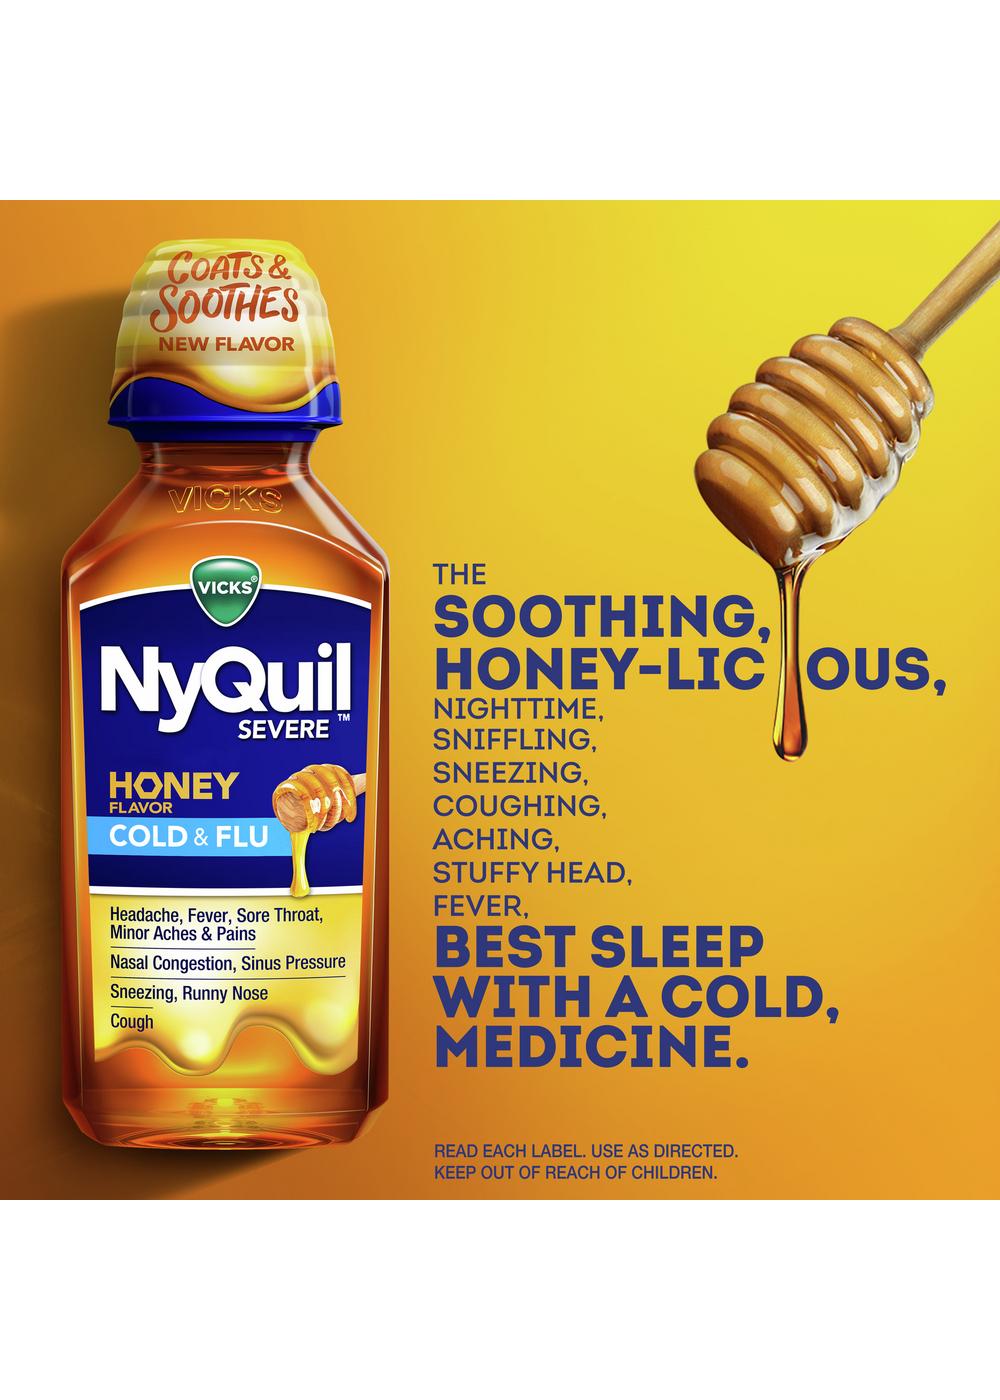 Vicks NyQuil SEVERE Cold & Flu Liquid - Honey; image 4 of 11